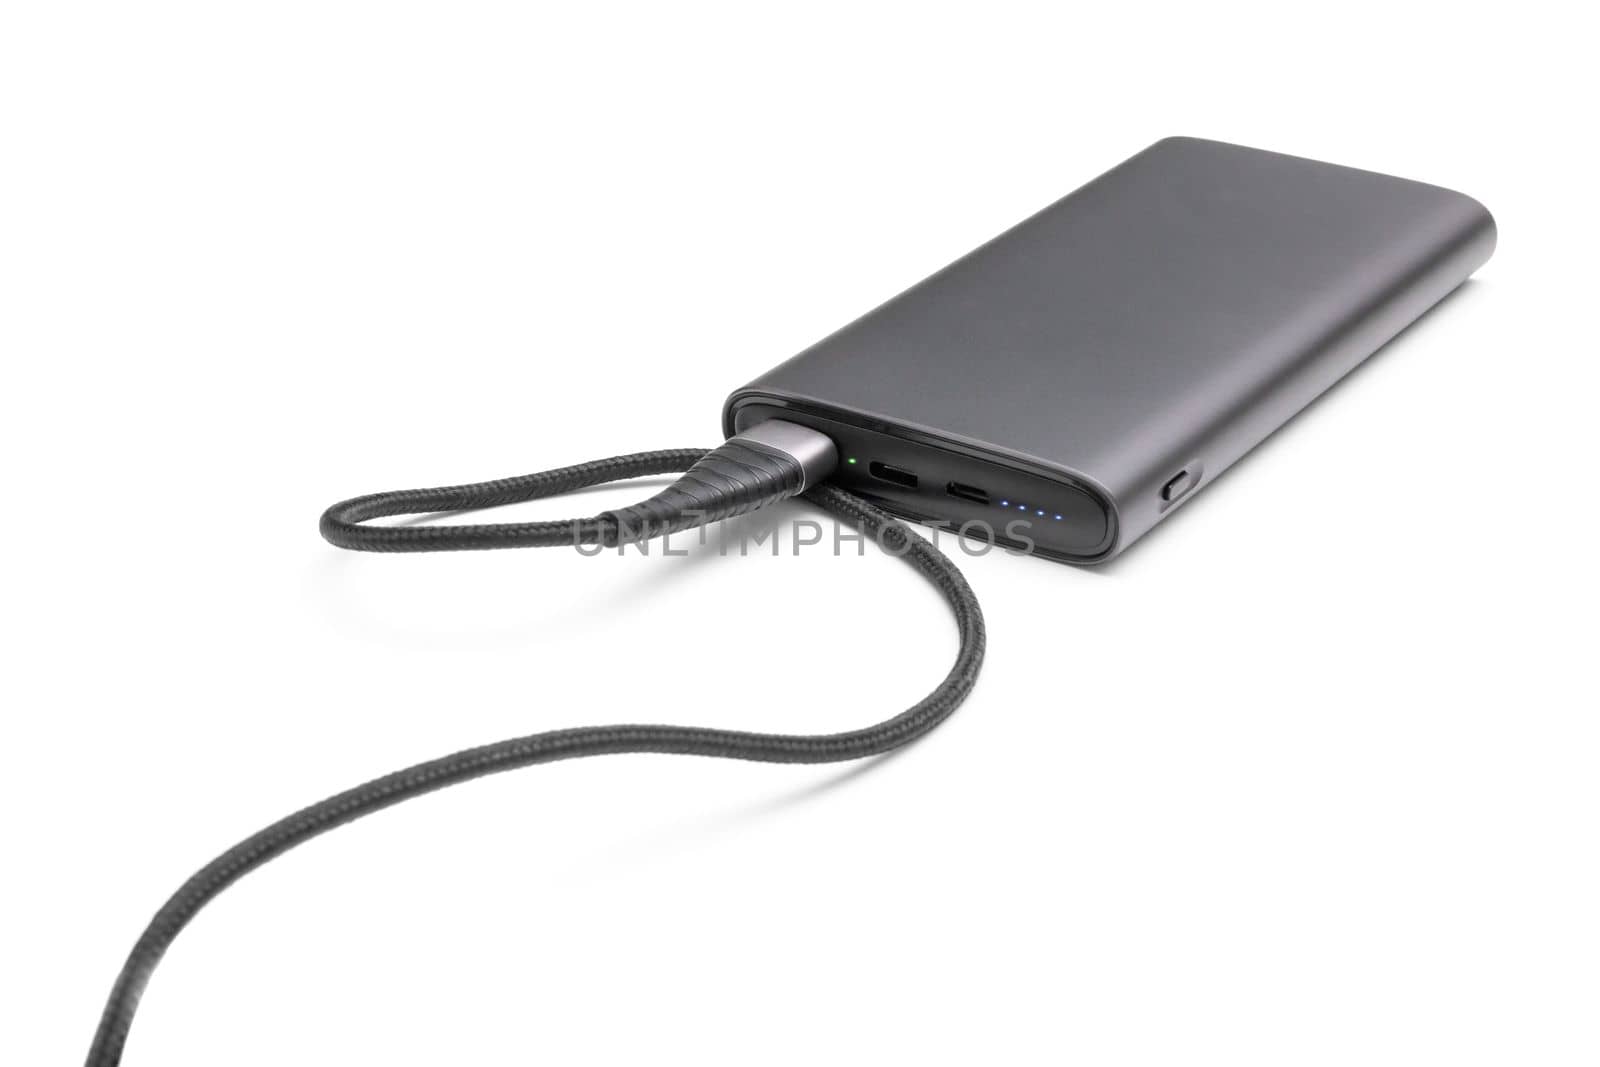 Powerbank new, powerful dark color with two usb inputs on a white background by clusterx